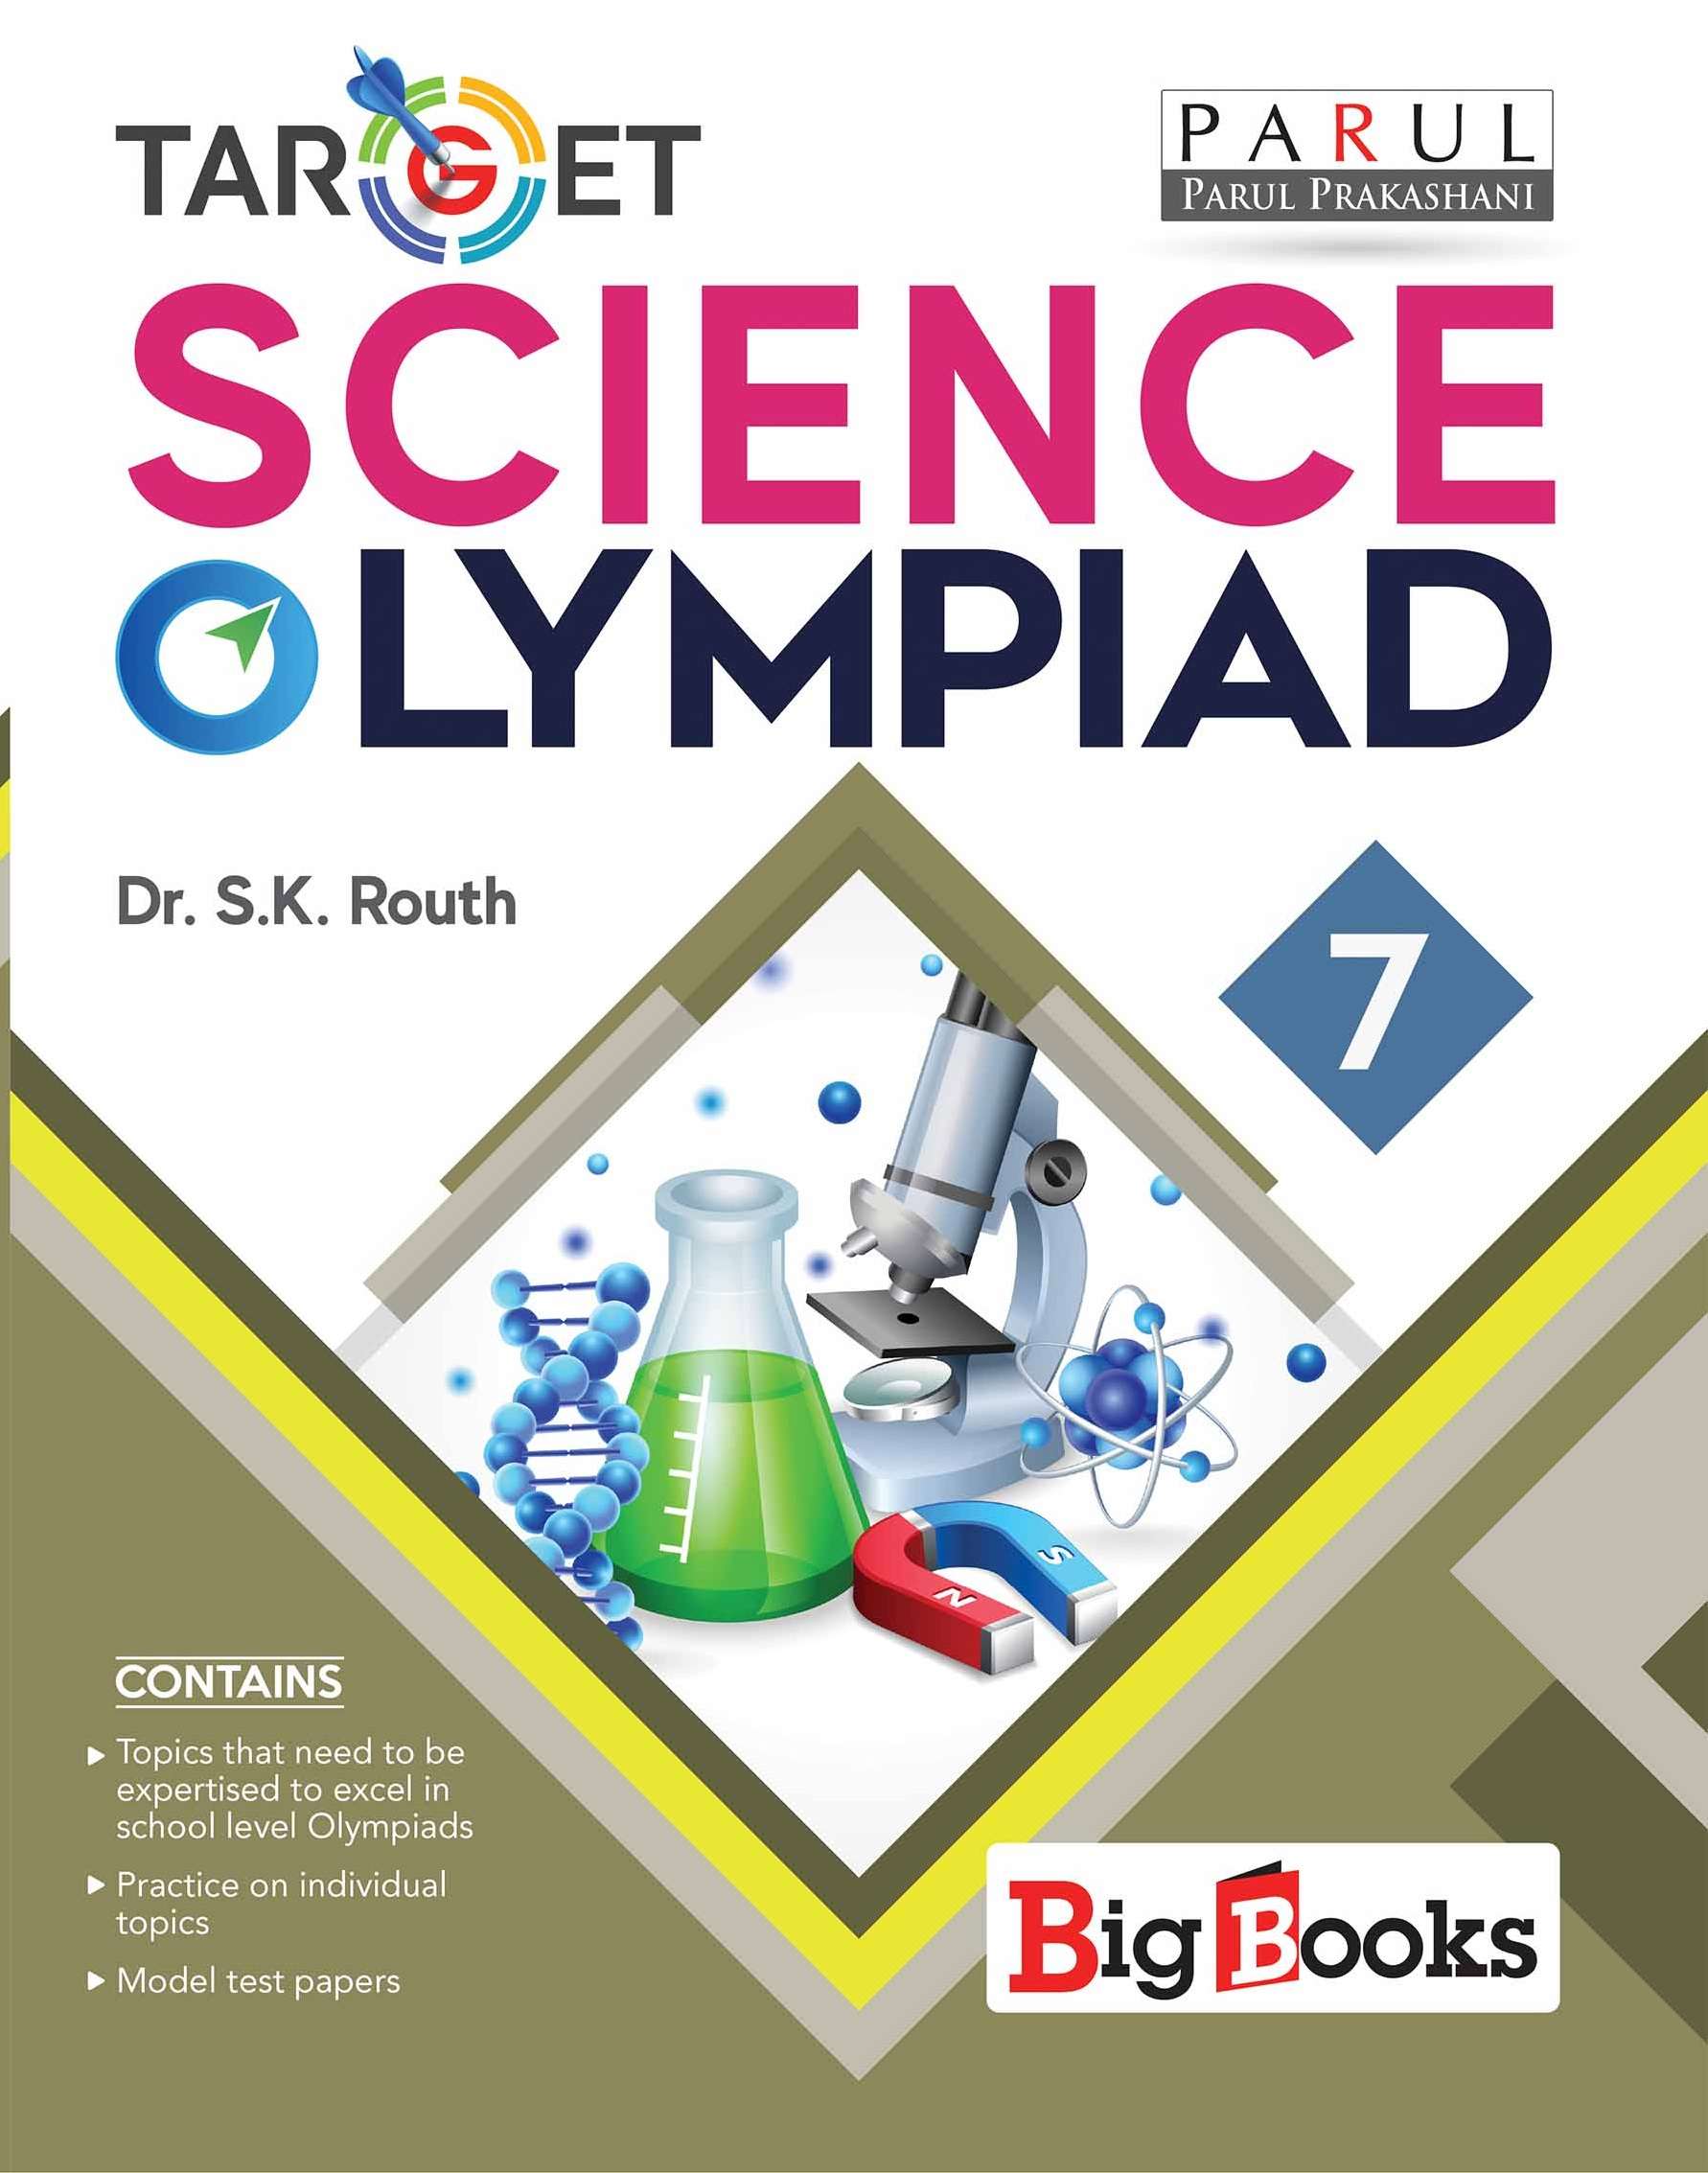 Buy Science Olympiad book for 7